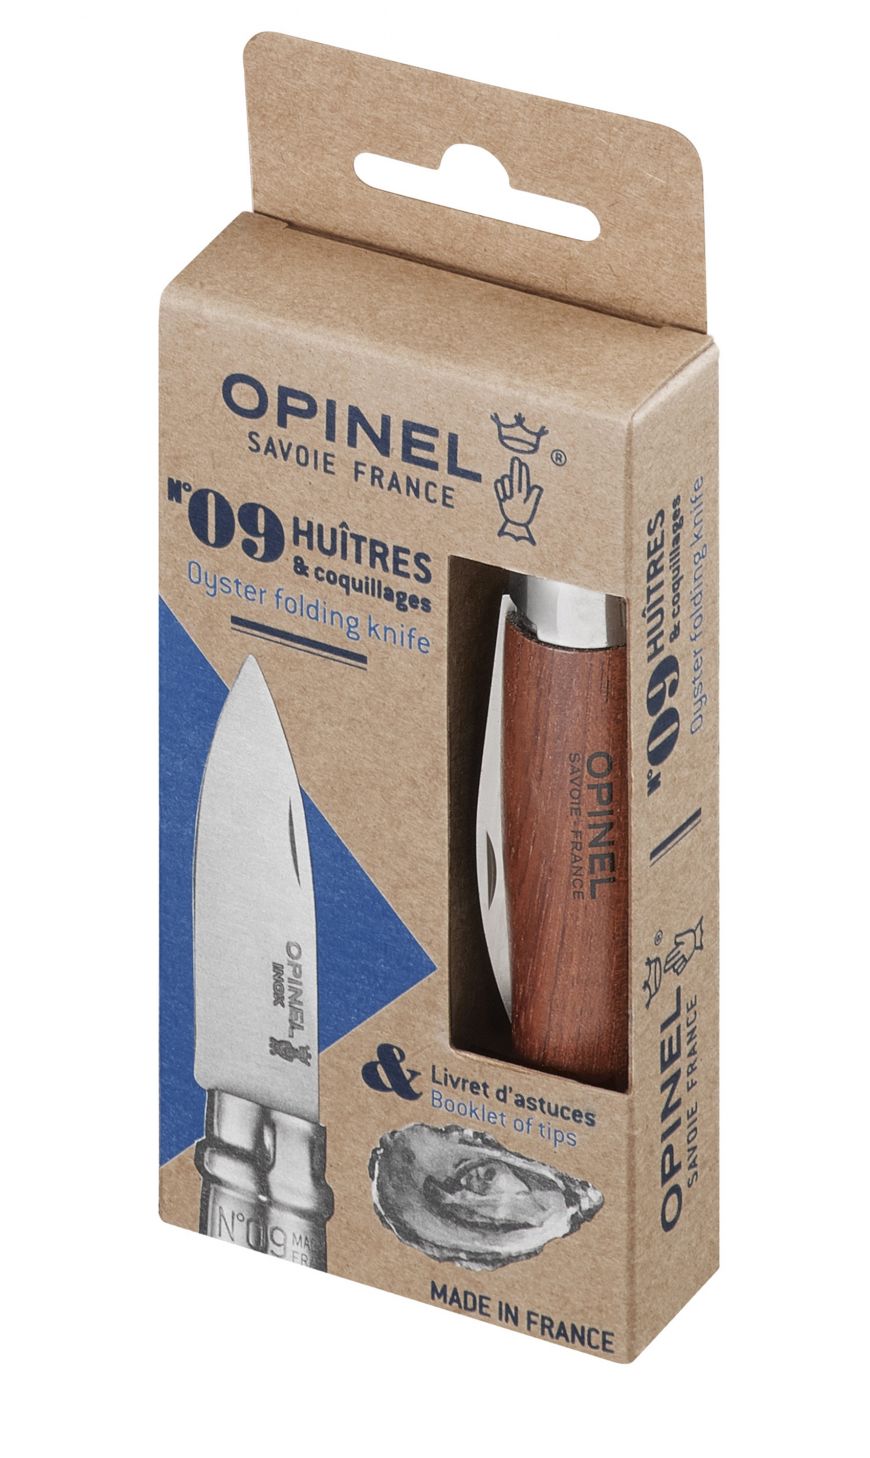 Knife nº 9 for oysters and shellfish - Opinel